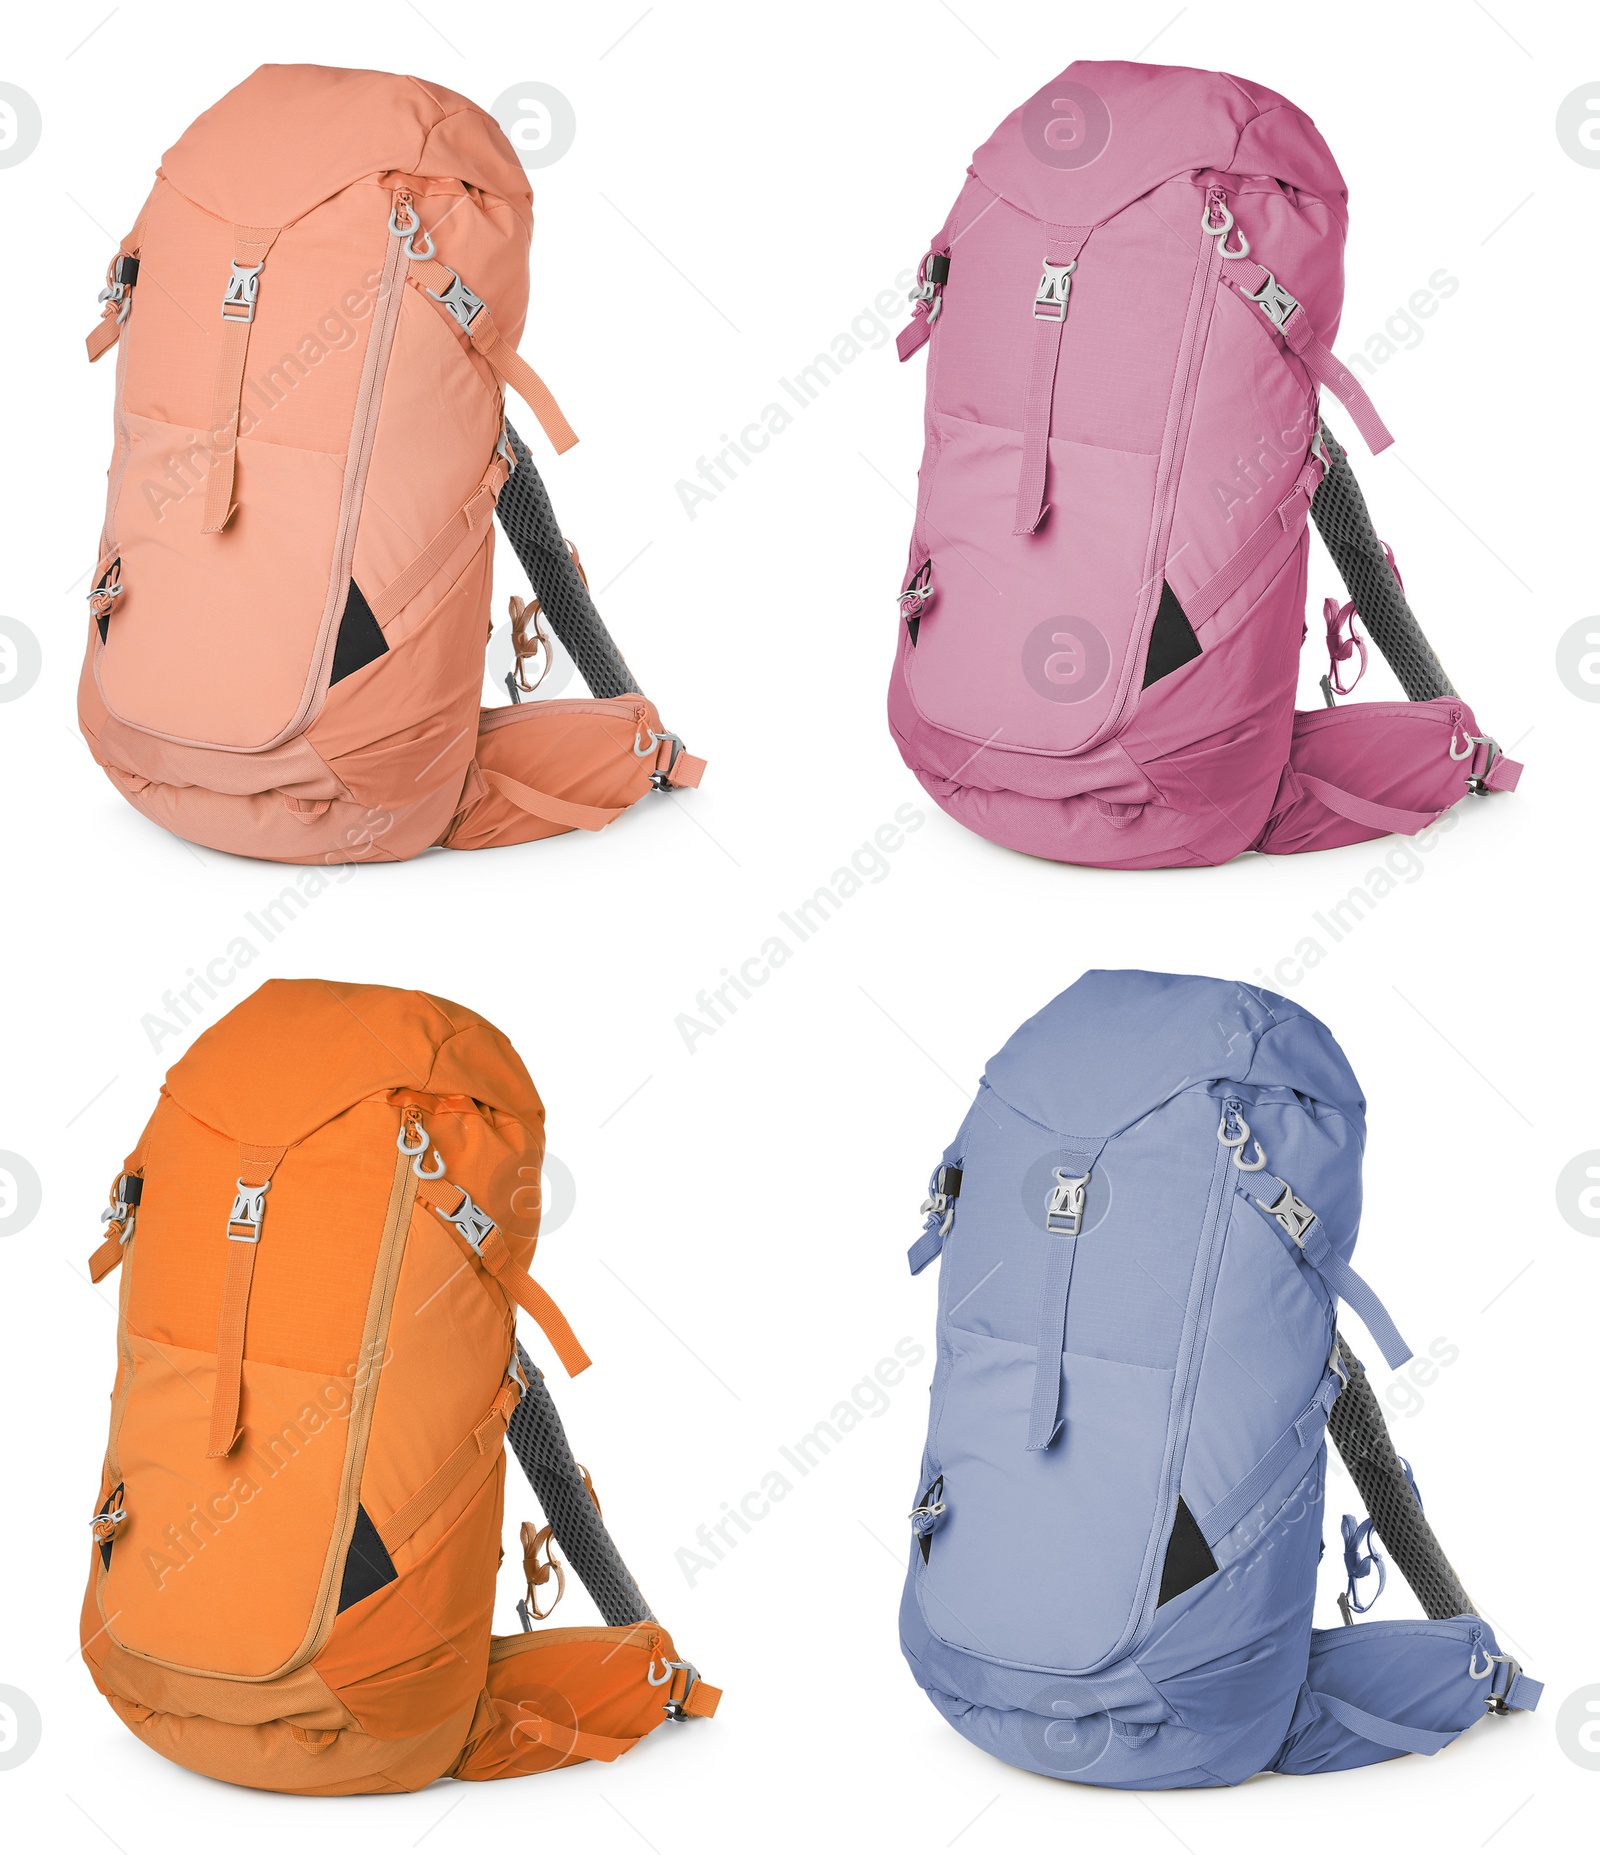 Image of Different hiking backpacks on white background, collage